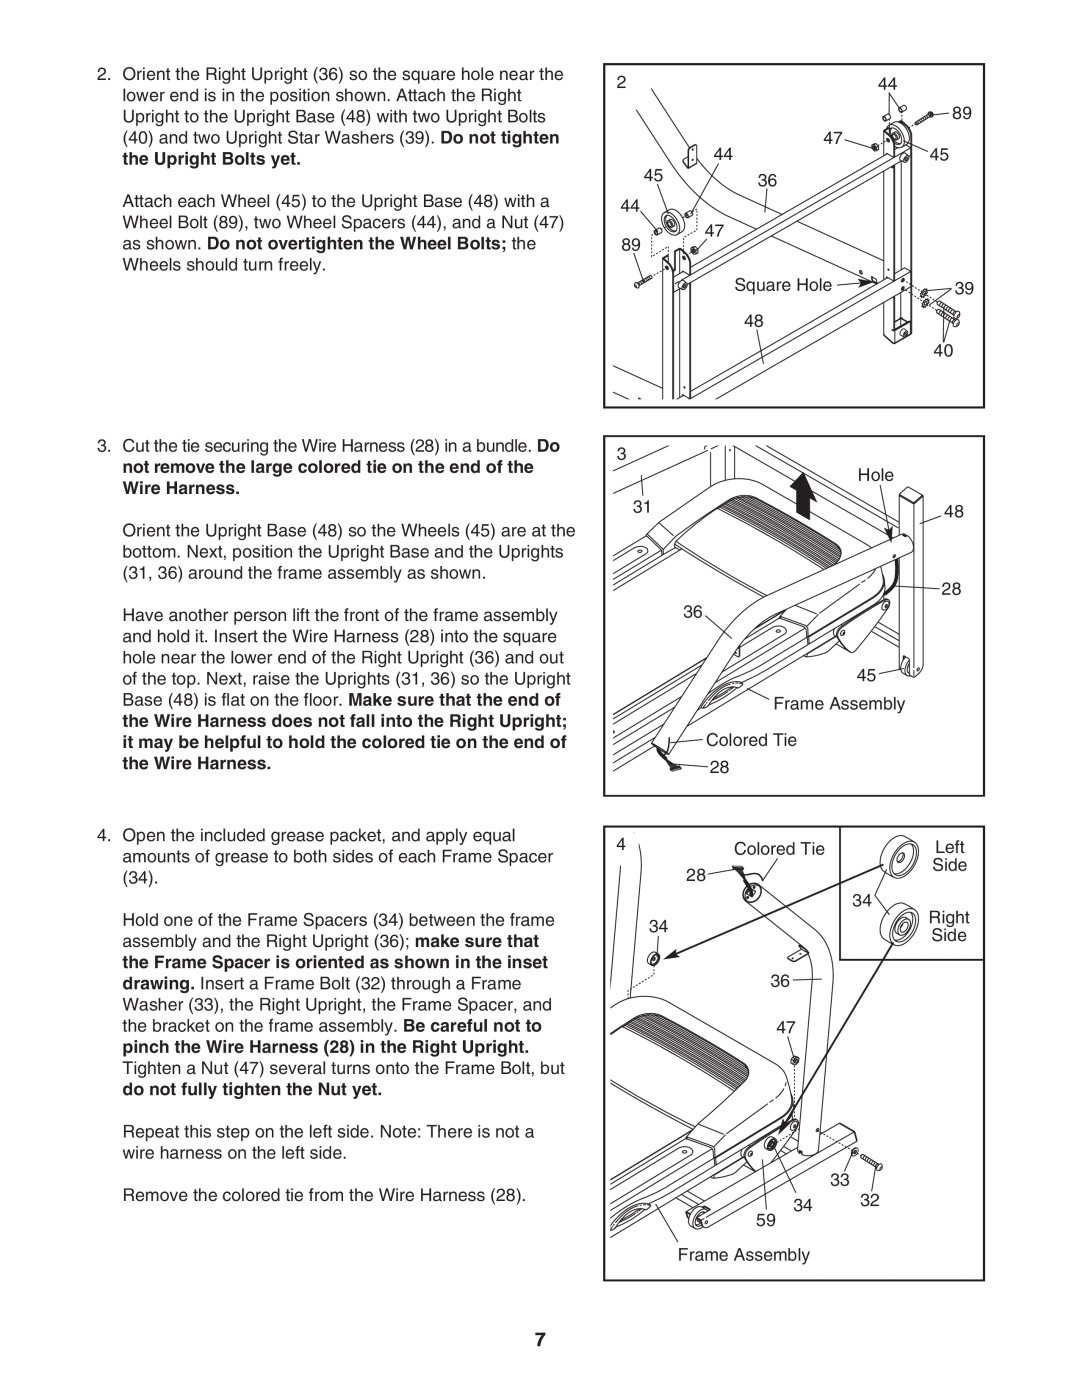 Image IMTL49105.0 Remove the colored tie from the Wire Harness, Square Hole, Frame Assembly, Colored Tie, Left, Side 